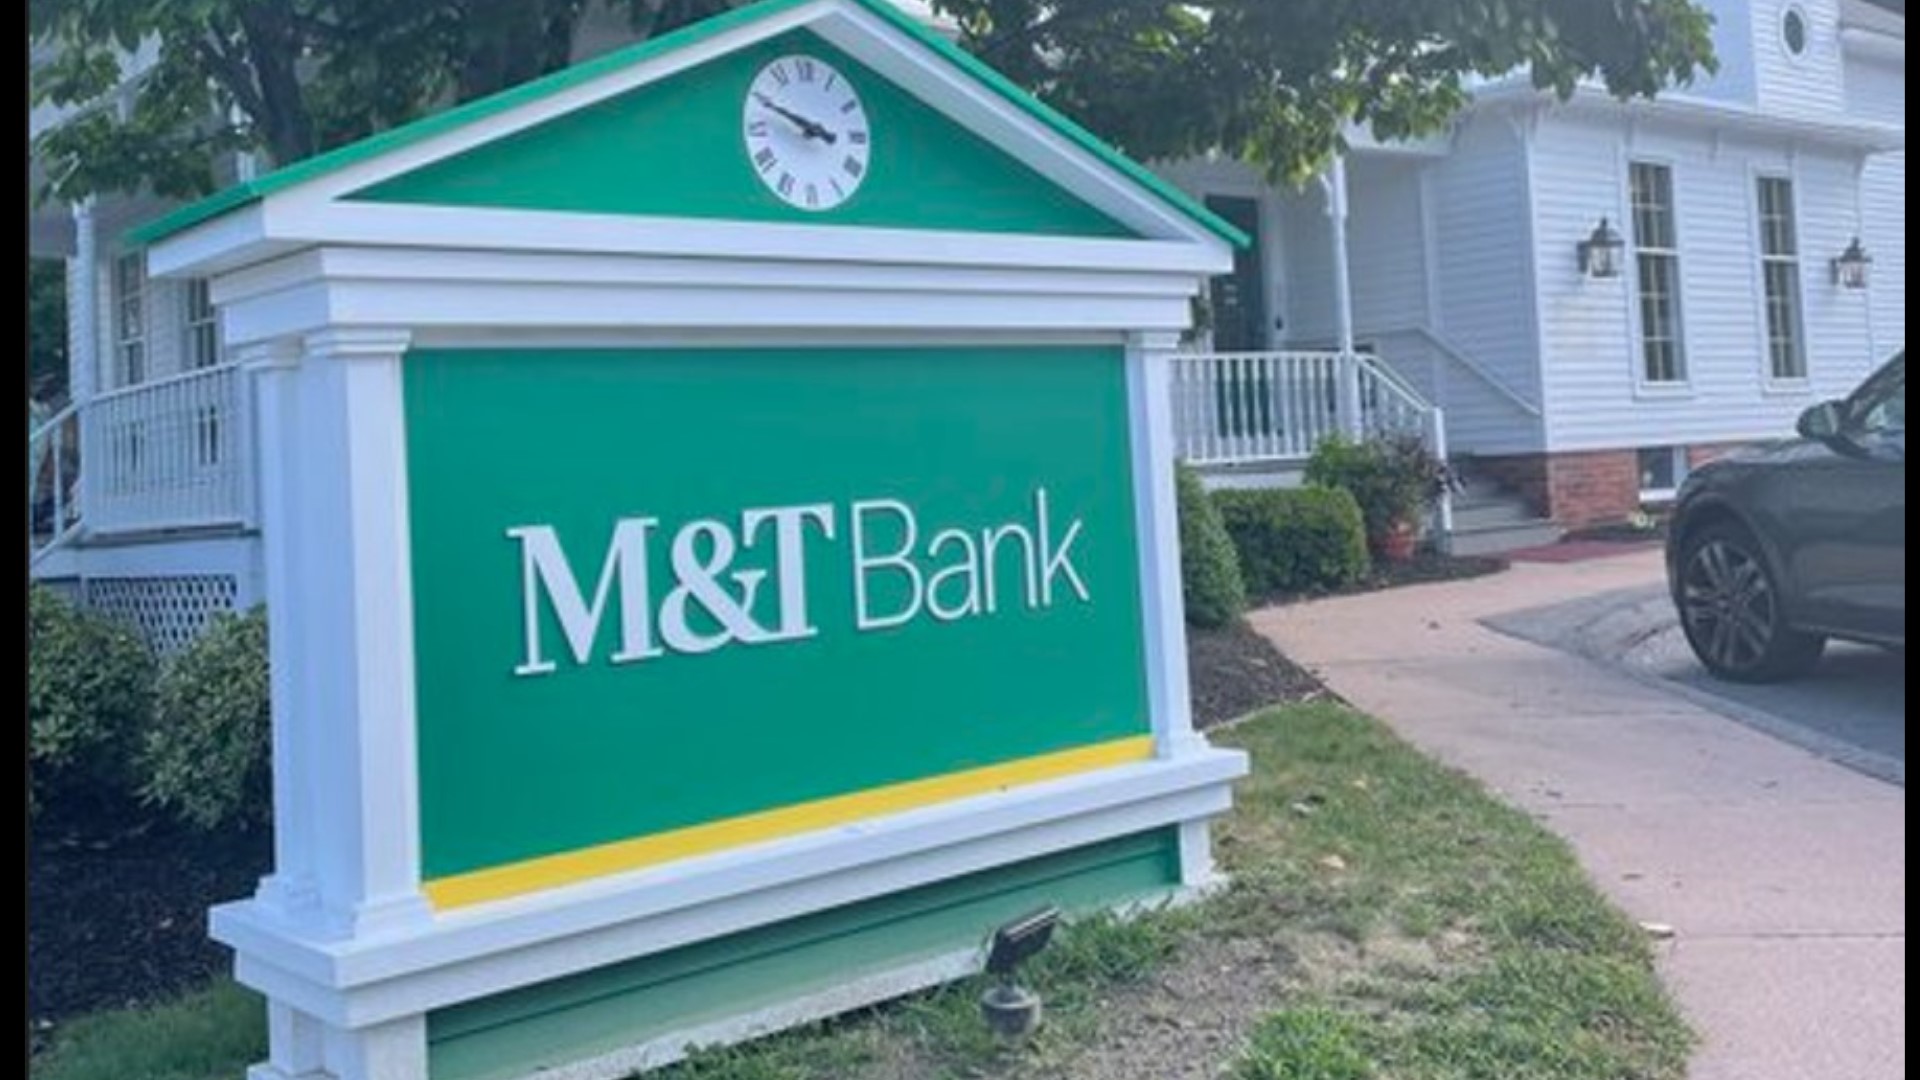 Former People's United Bank users merged with M&T Bank over Labor Day Weekend, some still can't access accounts or reach a representative for help